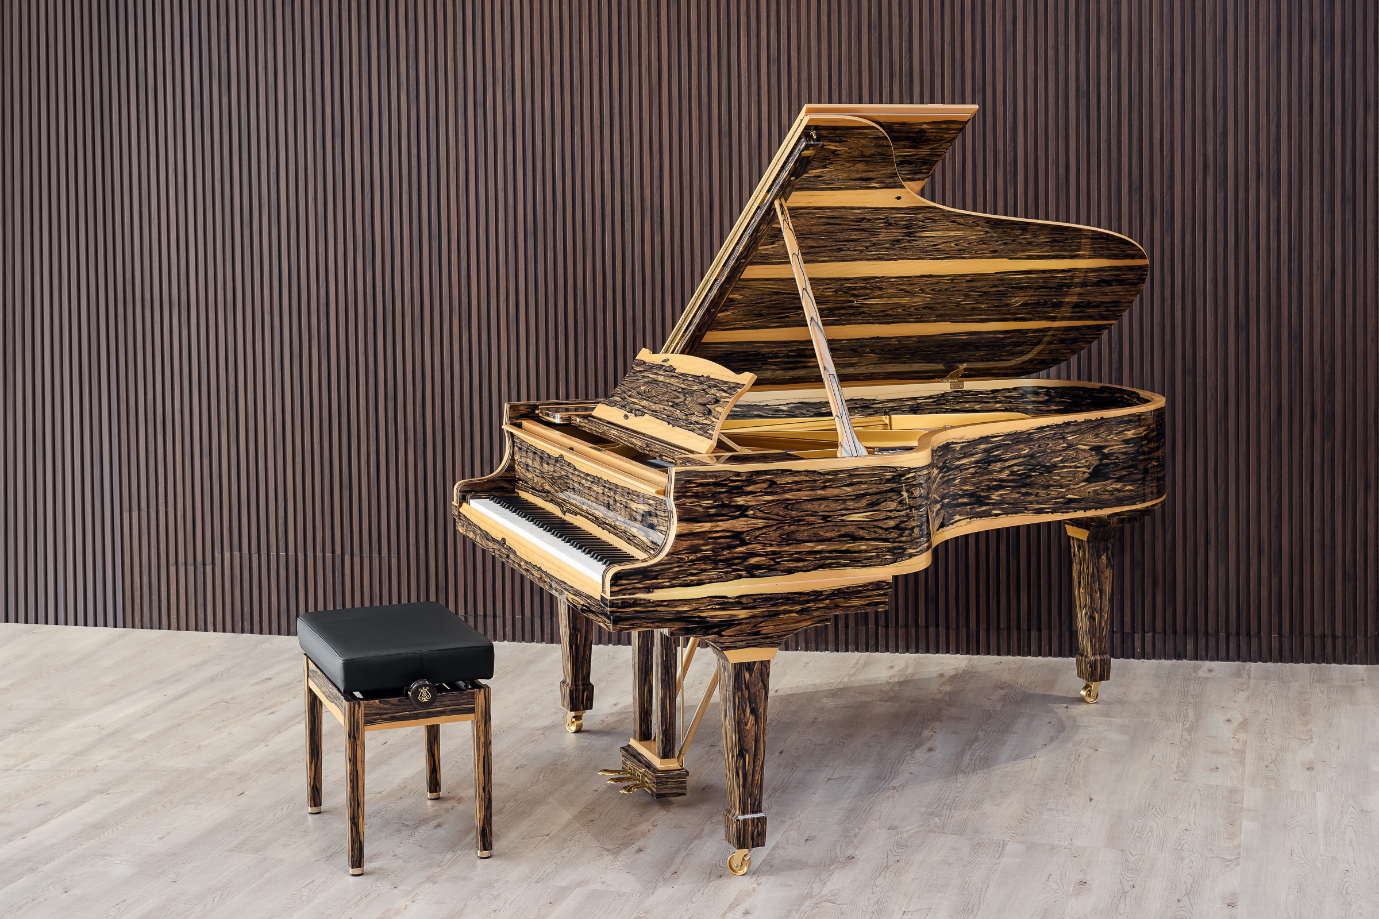 The Steinway Crown Jewel on which Joja Wendt performed on during the event